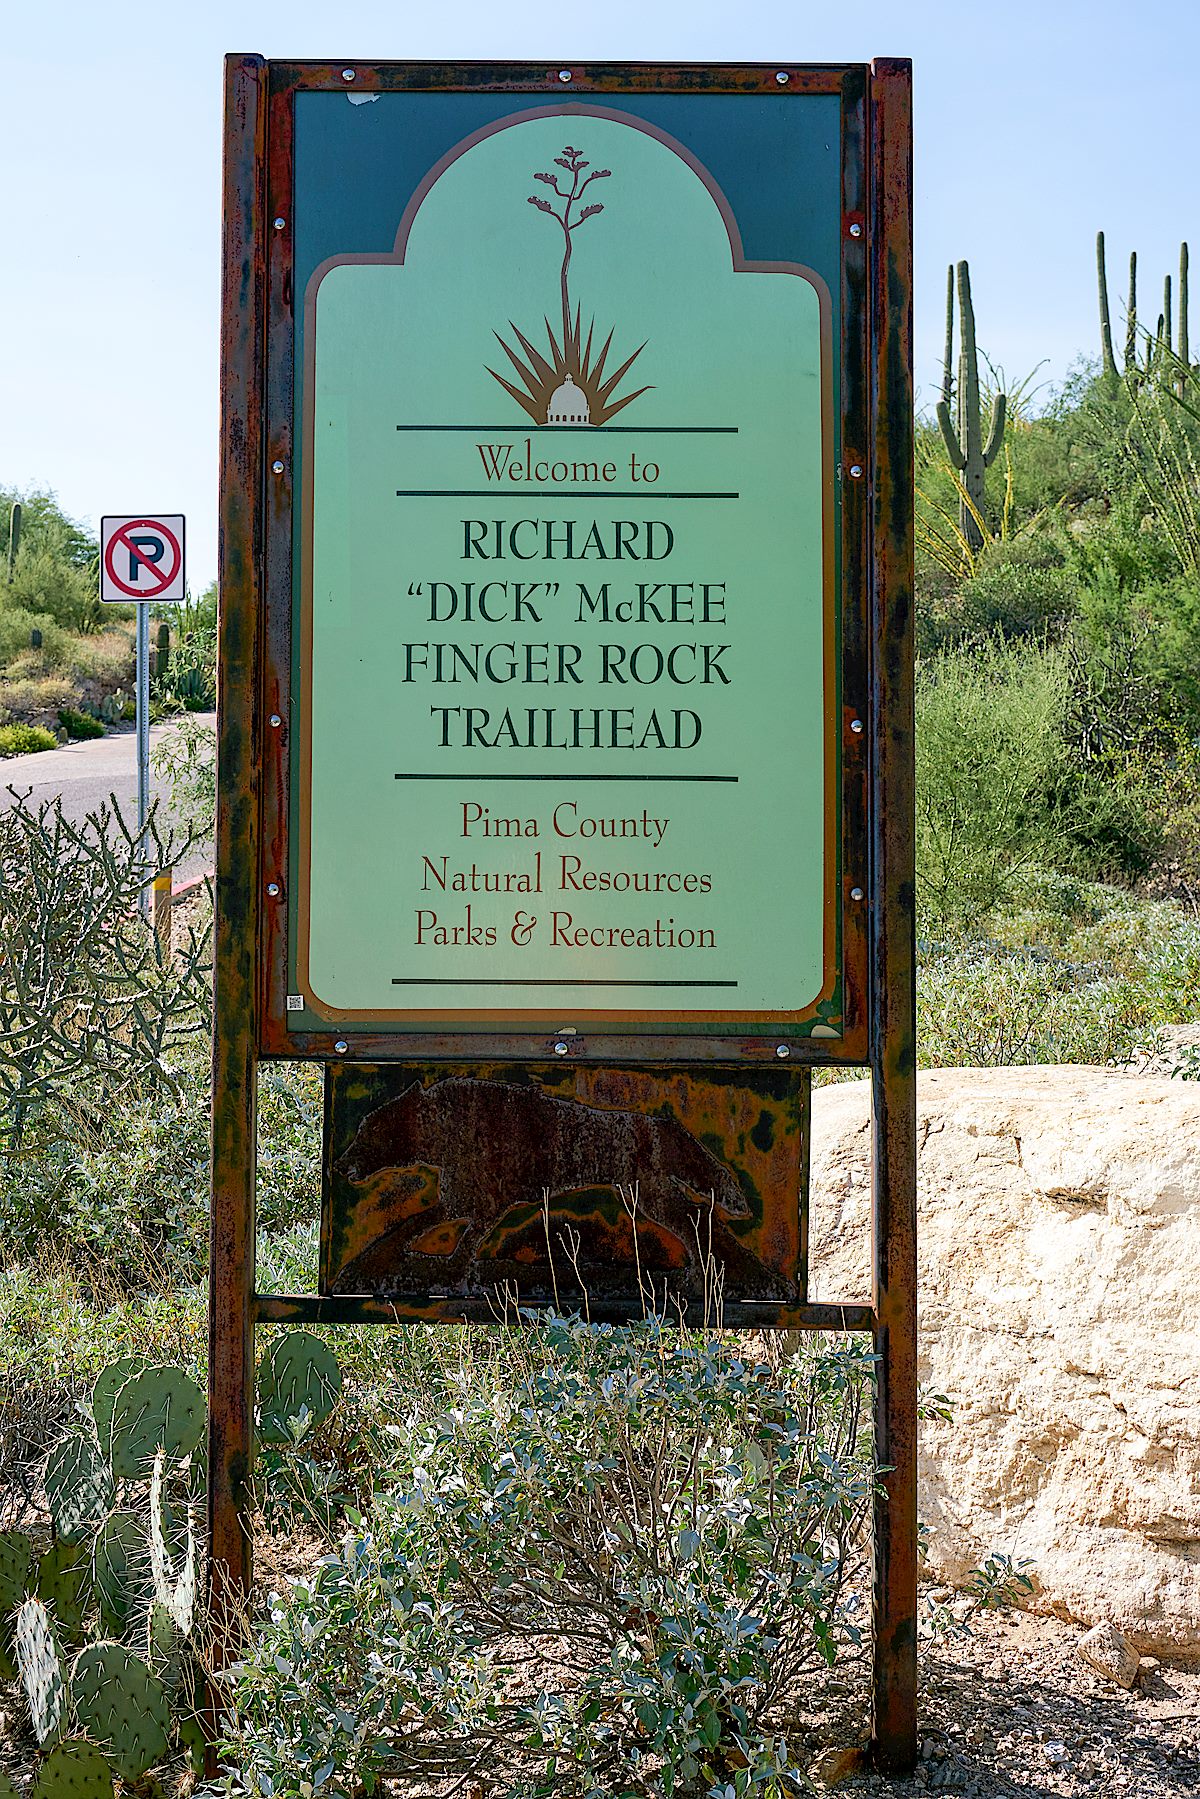 Trail sign at the start of the trail. August 2017.